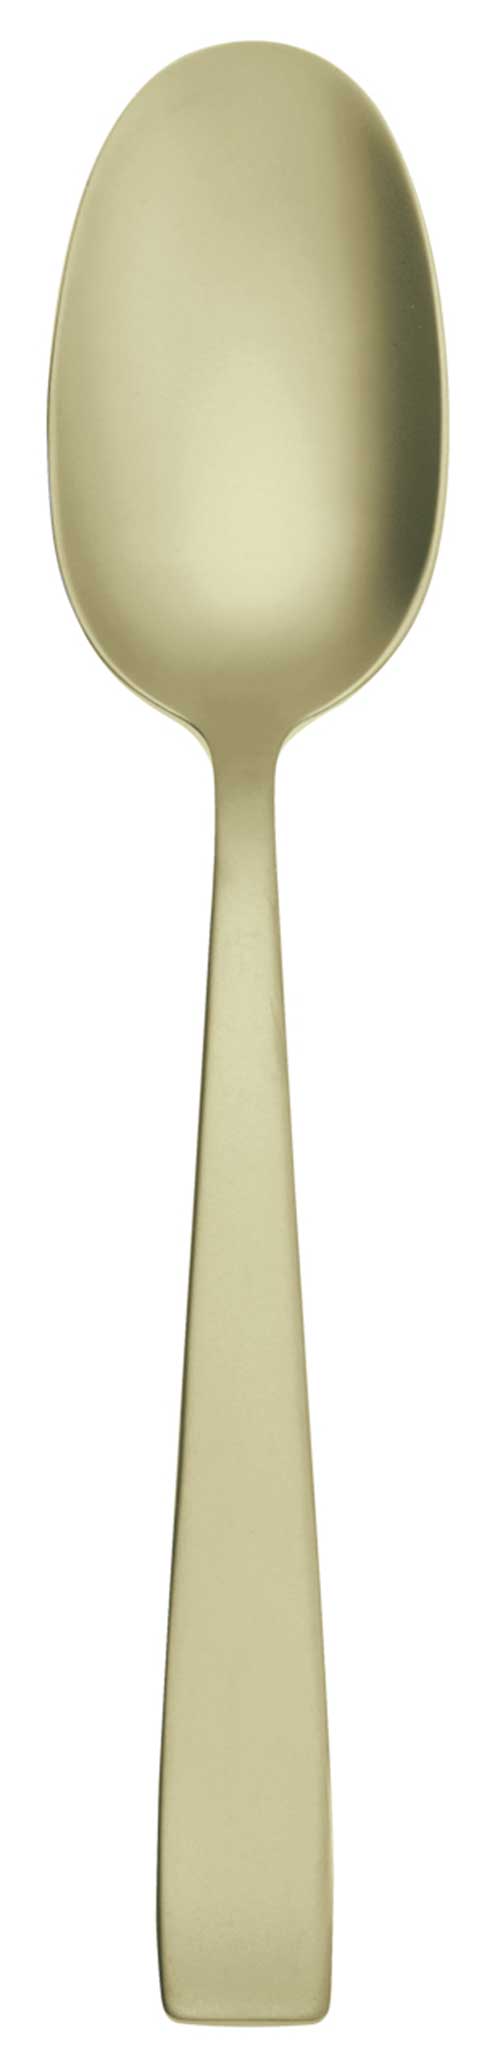 $46.00 Champagne Antico - Serving Spoon 18/10 s/s - PVD Champagne